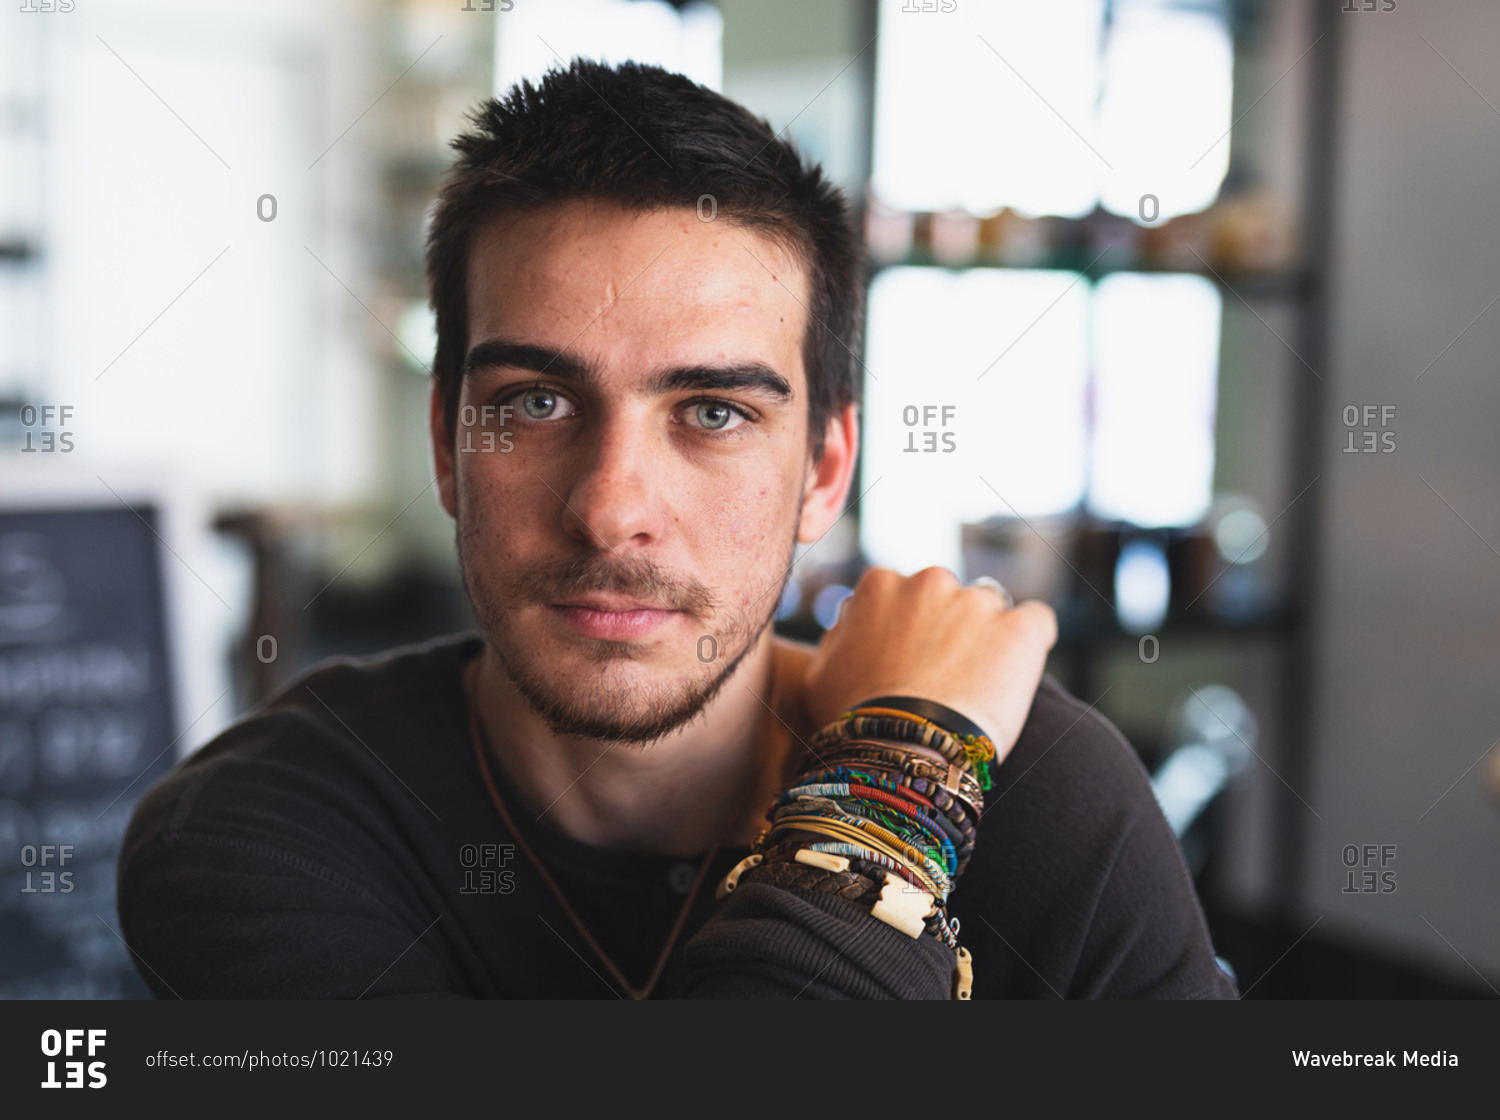 Portrait of a Caucasian man wearing casual clothes and jewelry, sitting by a table in a coffee shop, looking straight into a camera